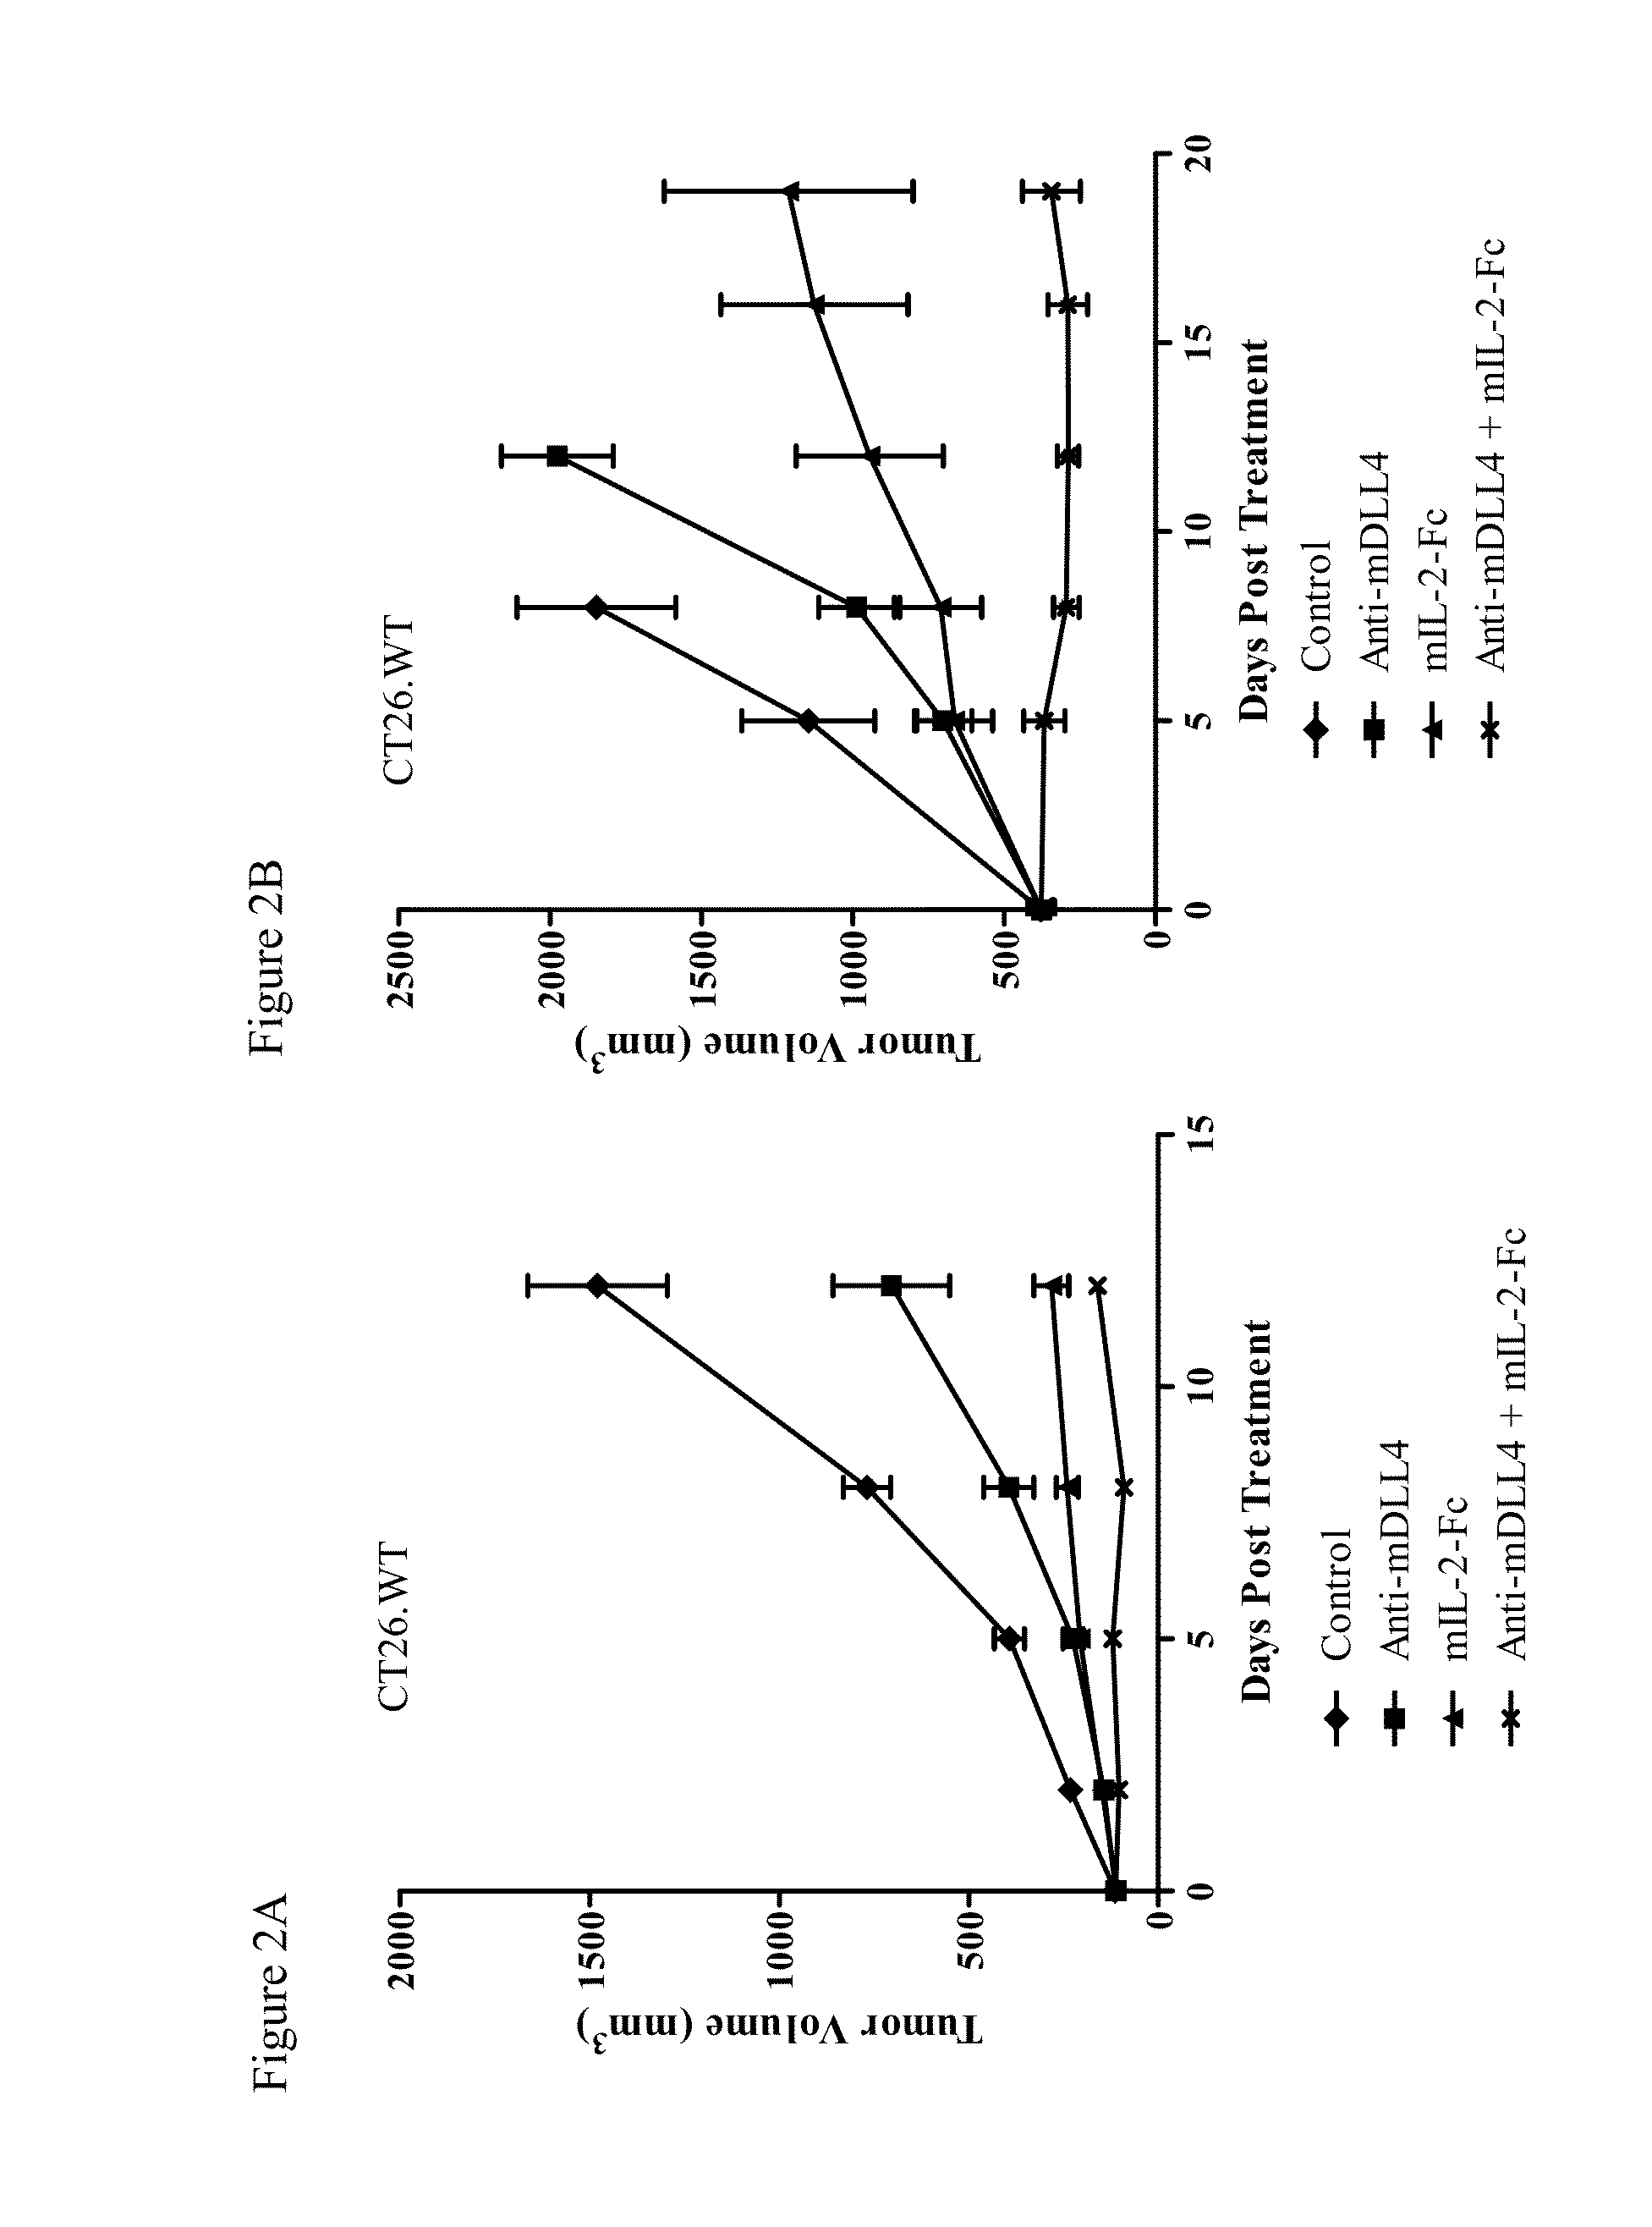 Combination Therapy For Treatment Of Disease